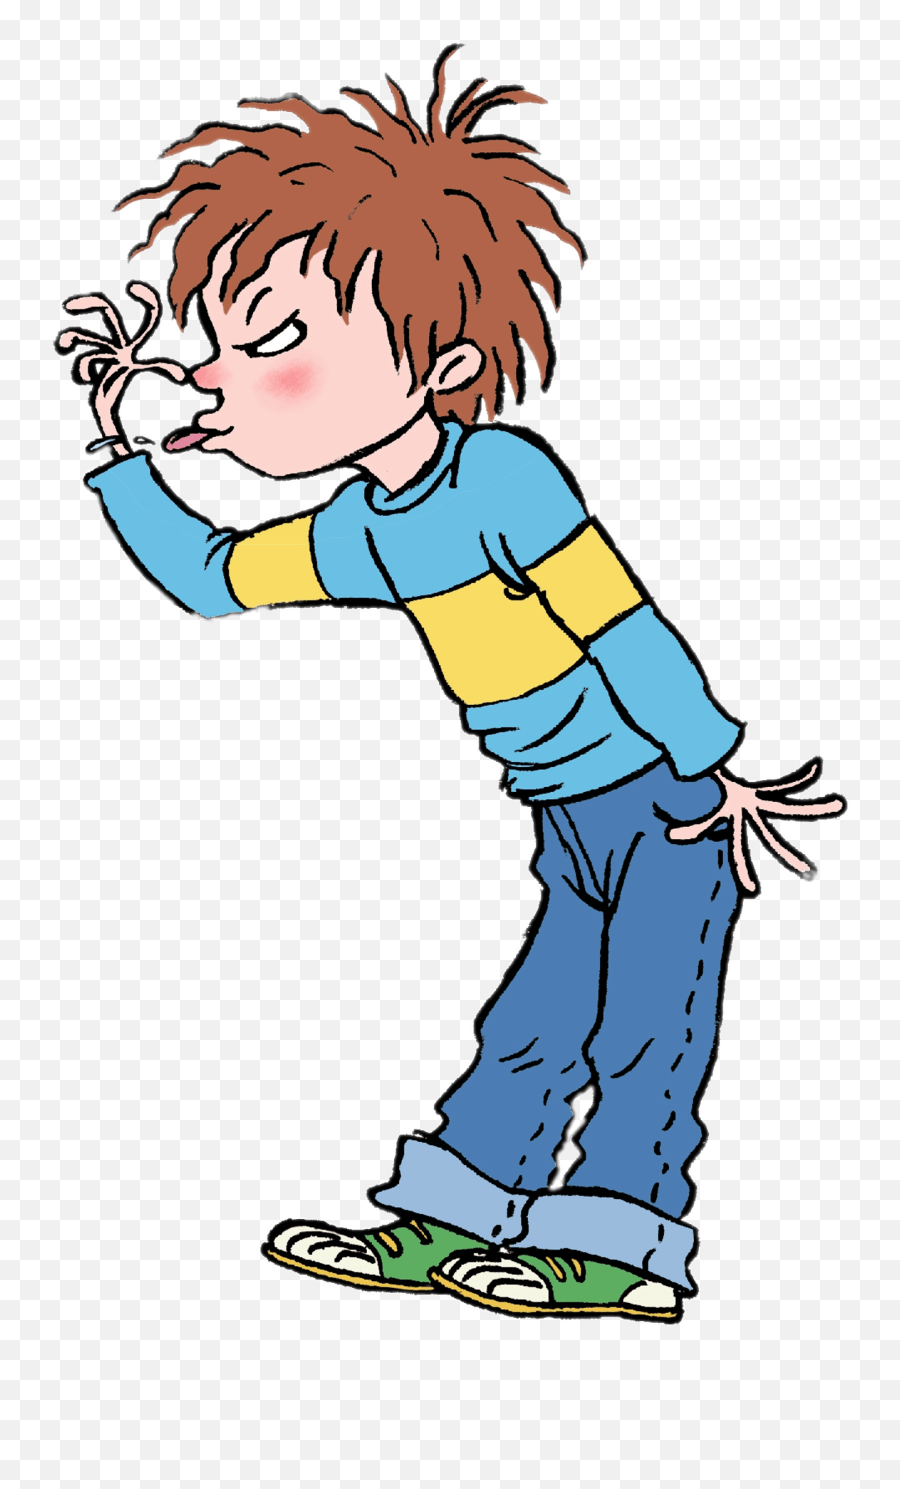 Horrid Henry Sticking Out Tongue - Drawing Horrid Henry Cartoon Emoji,Emoji With Tongue Sticking Out